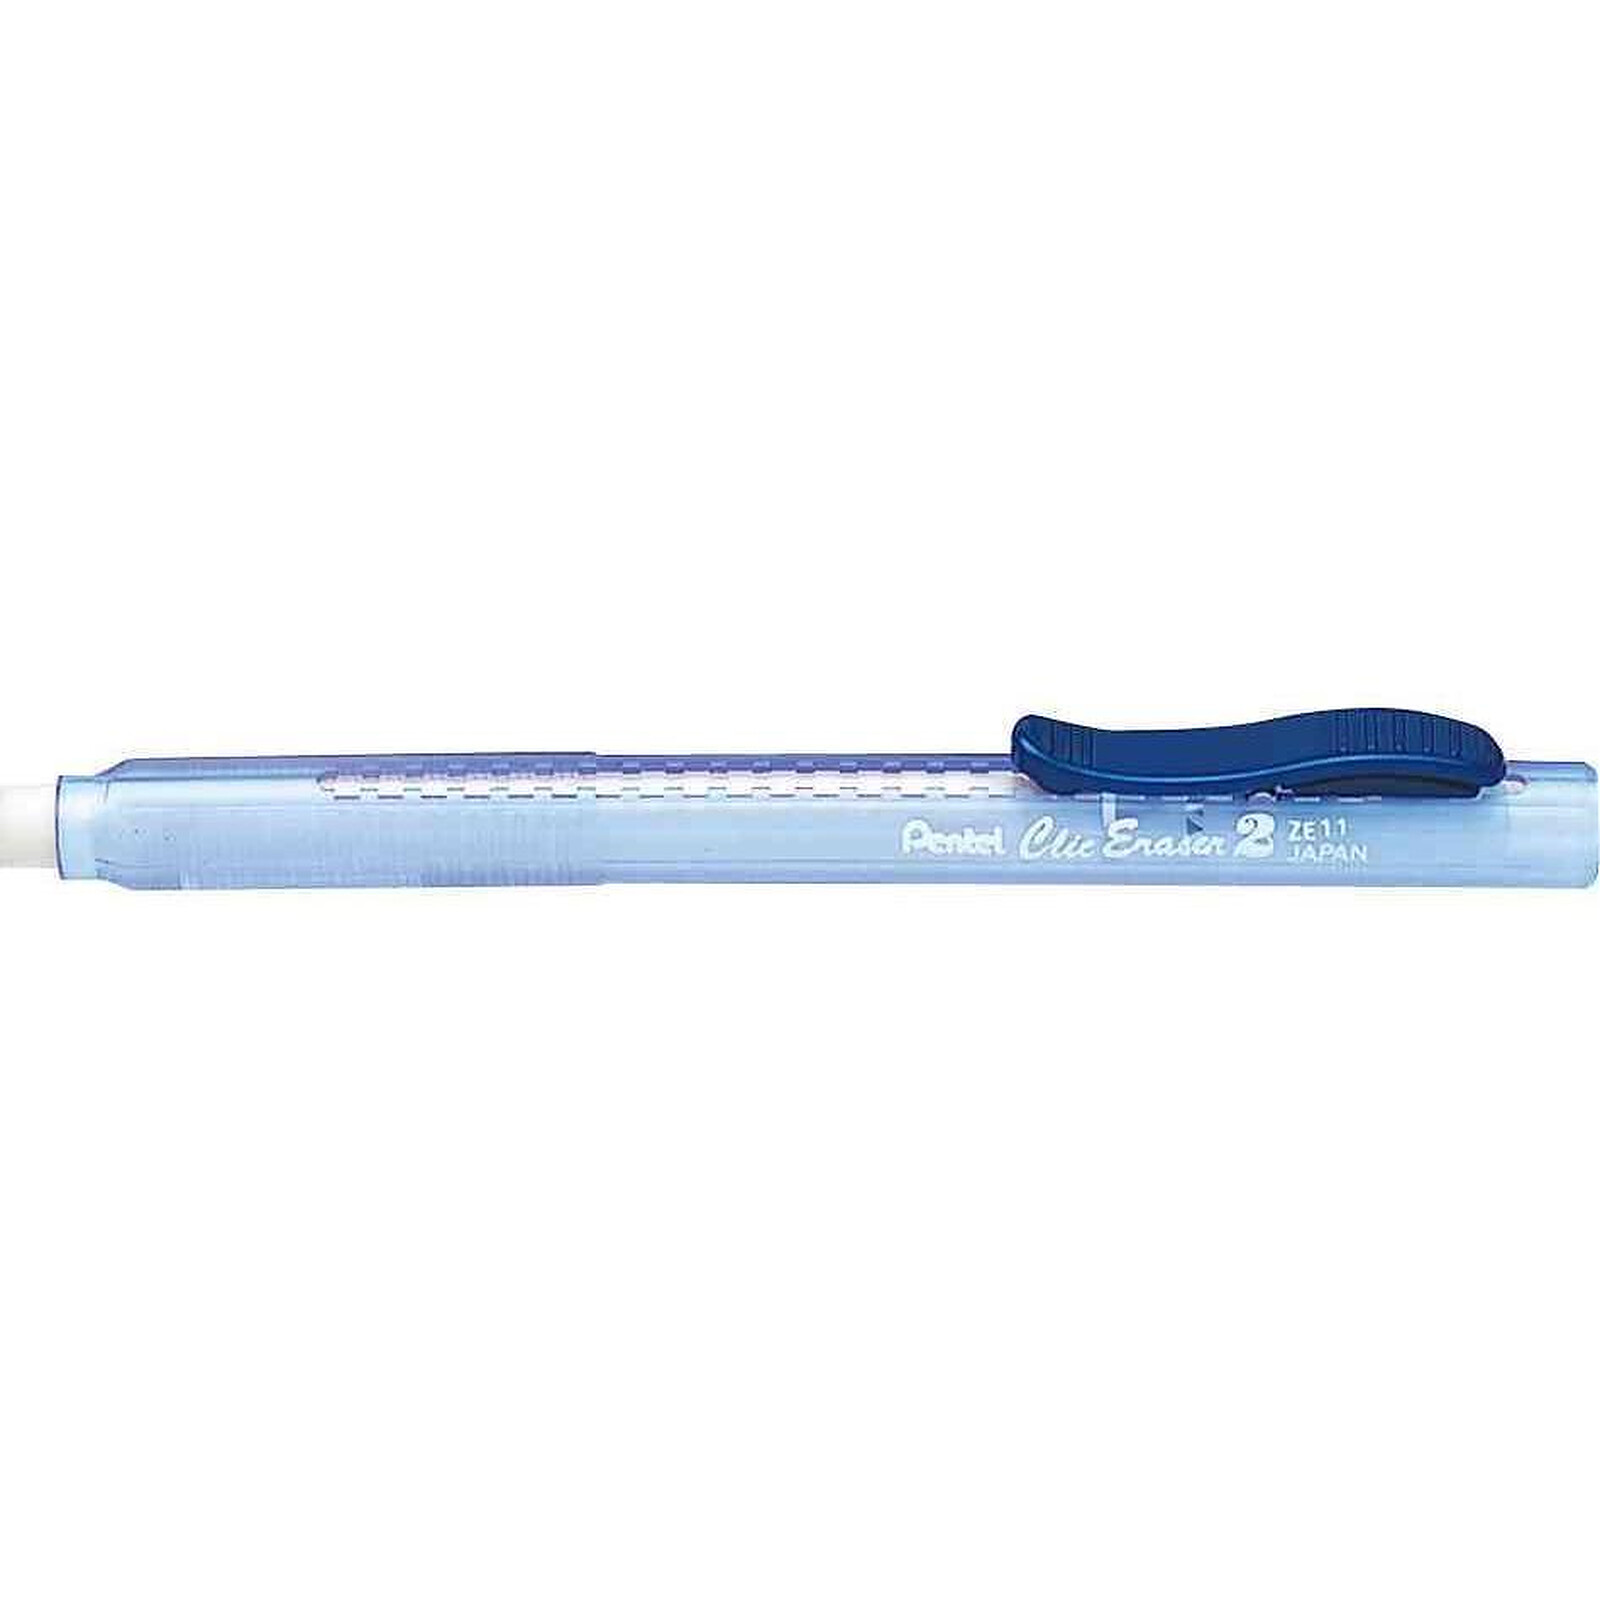 Staedtler gomme Mars Plastic stylo-gomme, corps bleu